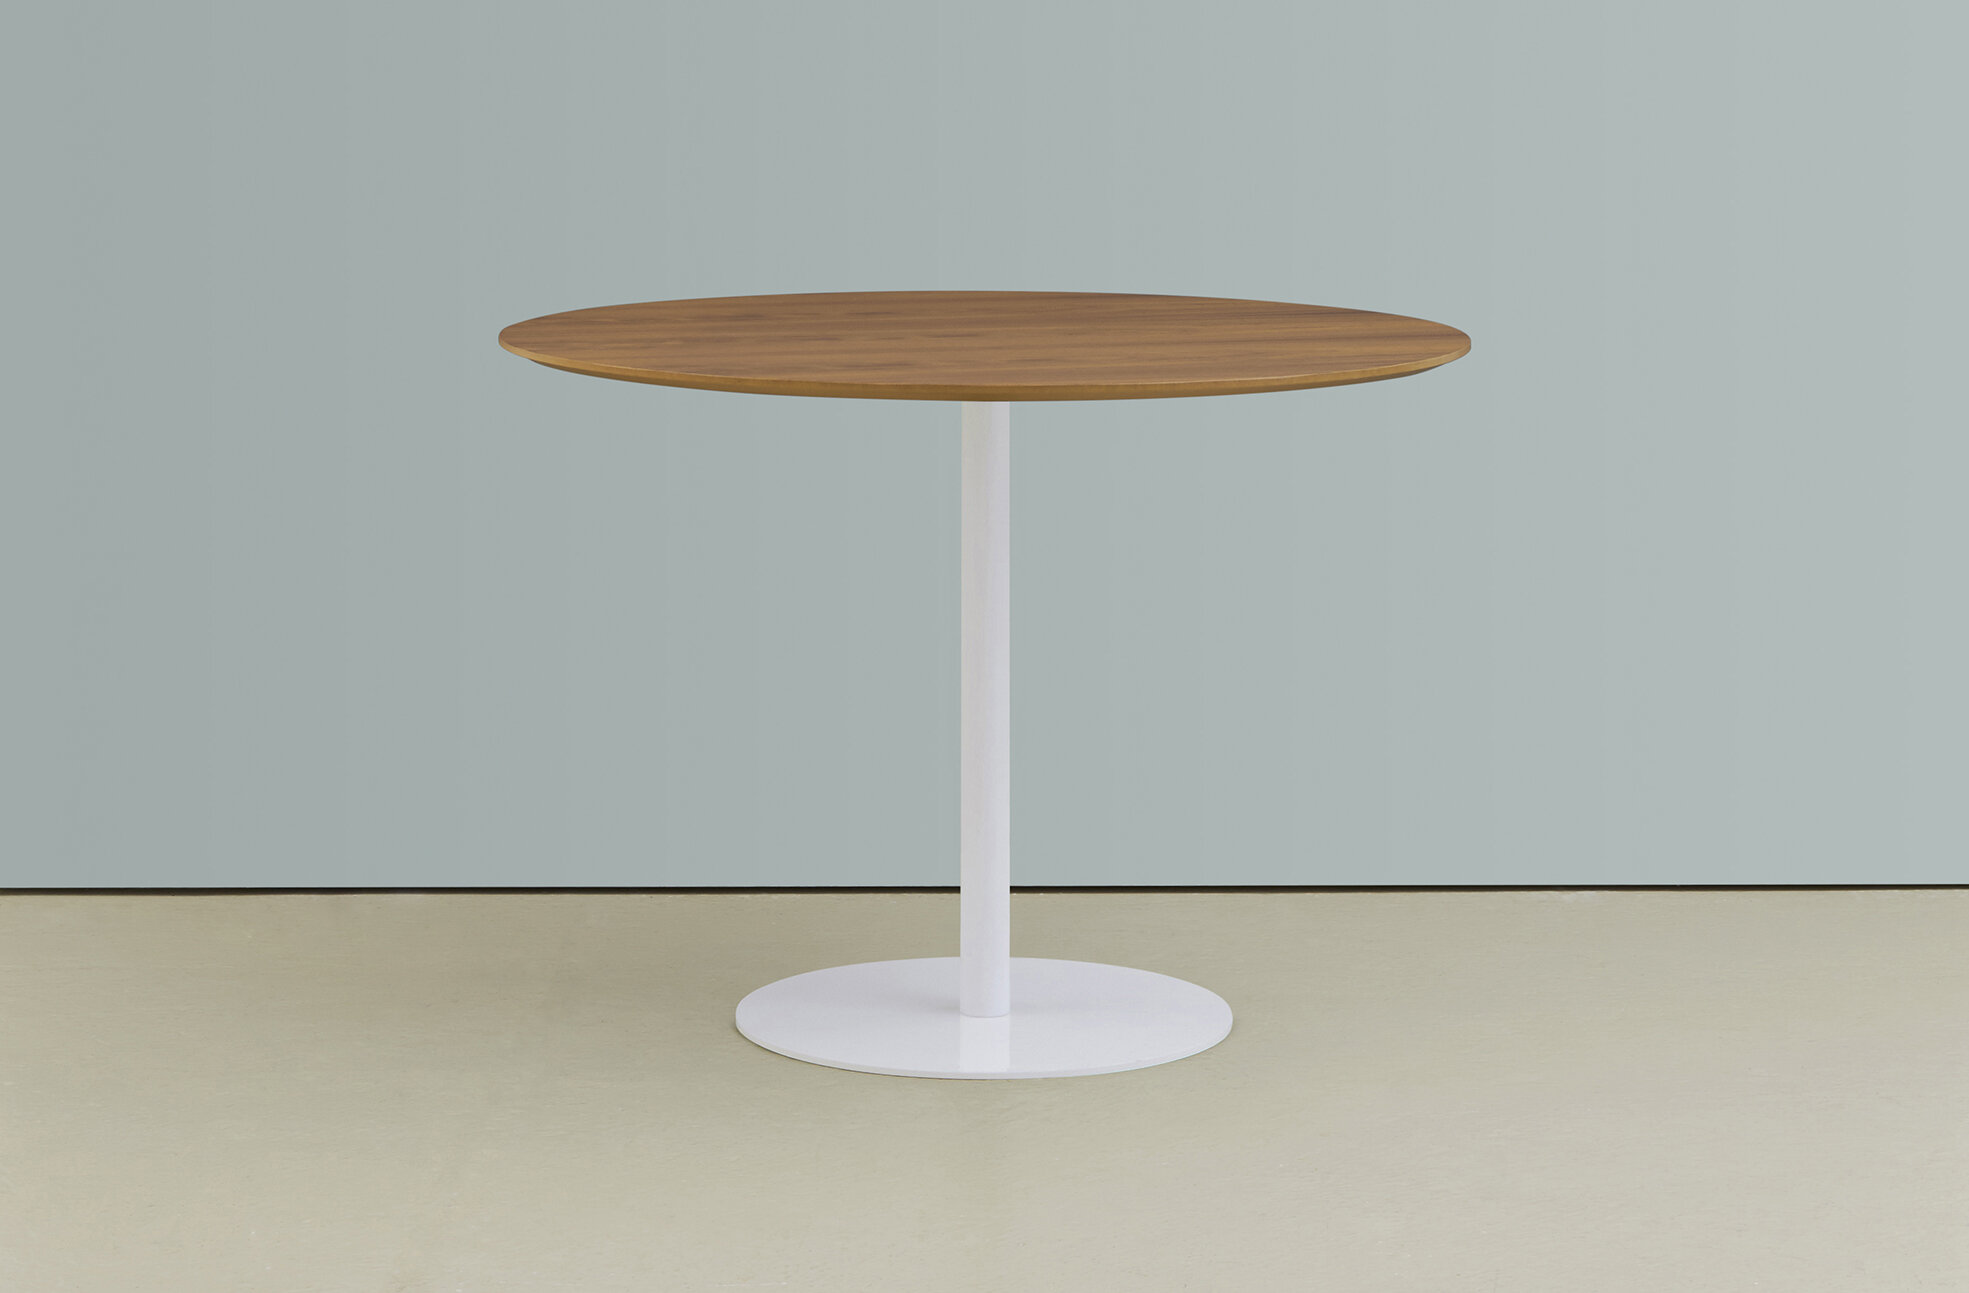 hm20s (white base, walnut top) (1) (low res).jpg